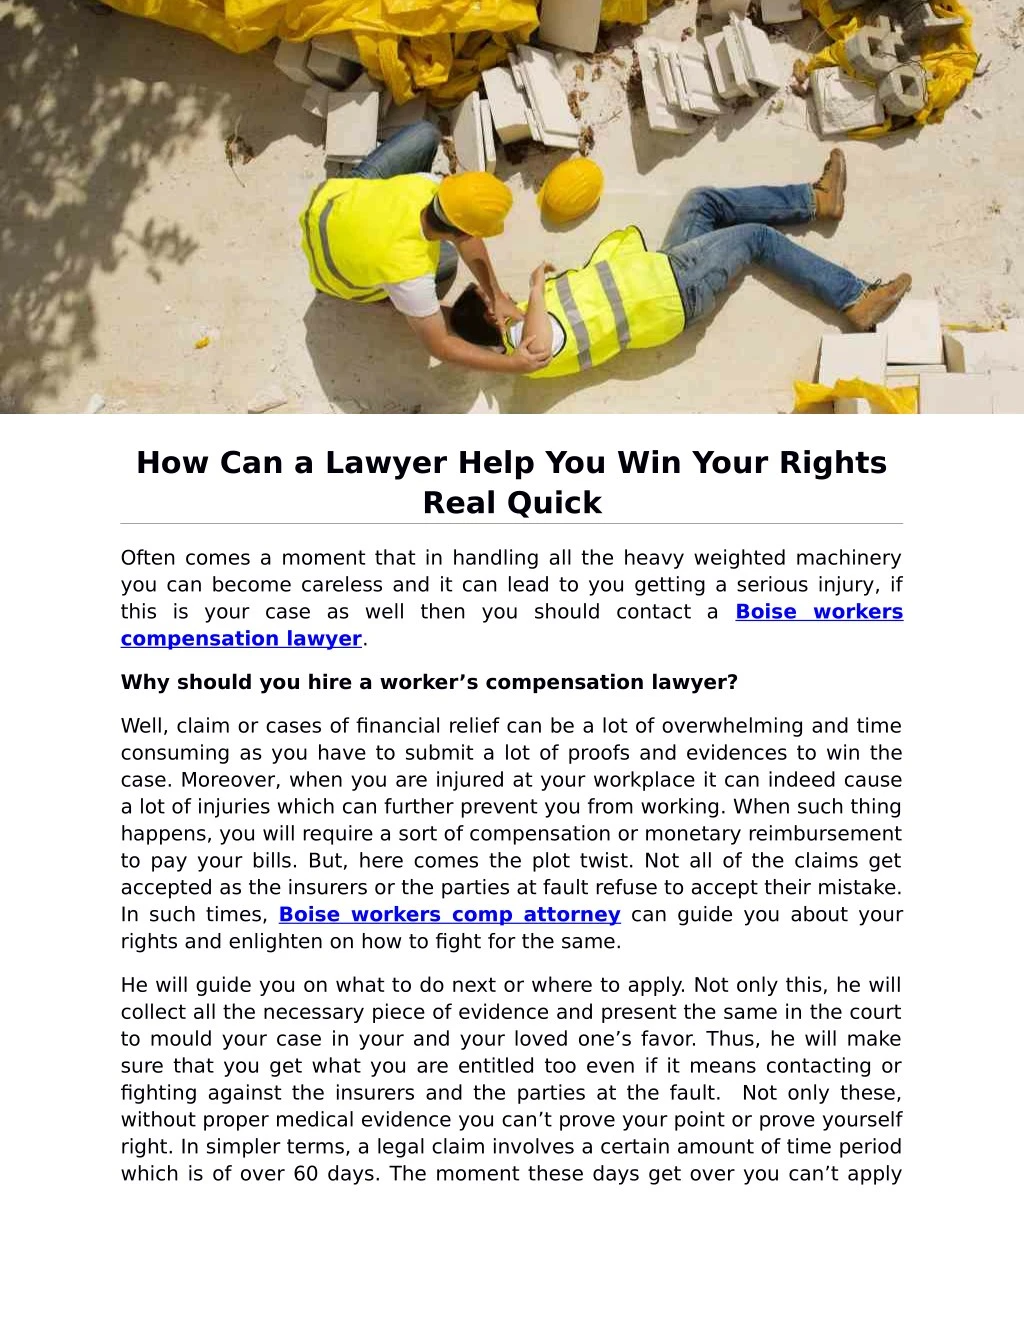 how can a lawyer help you win your rights real